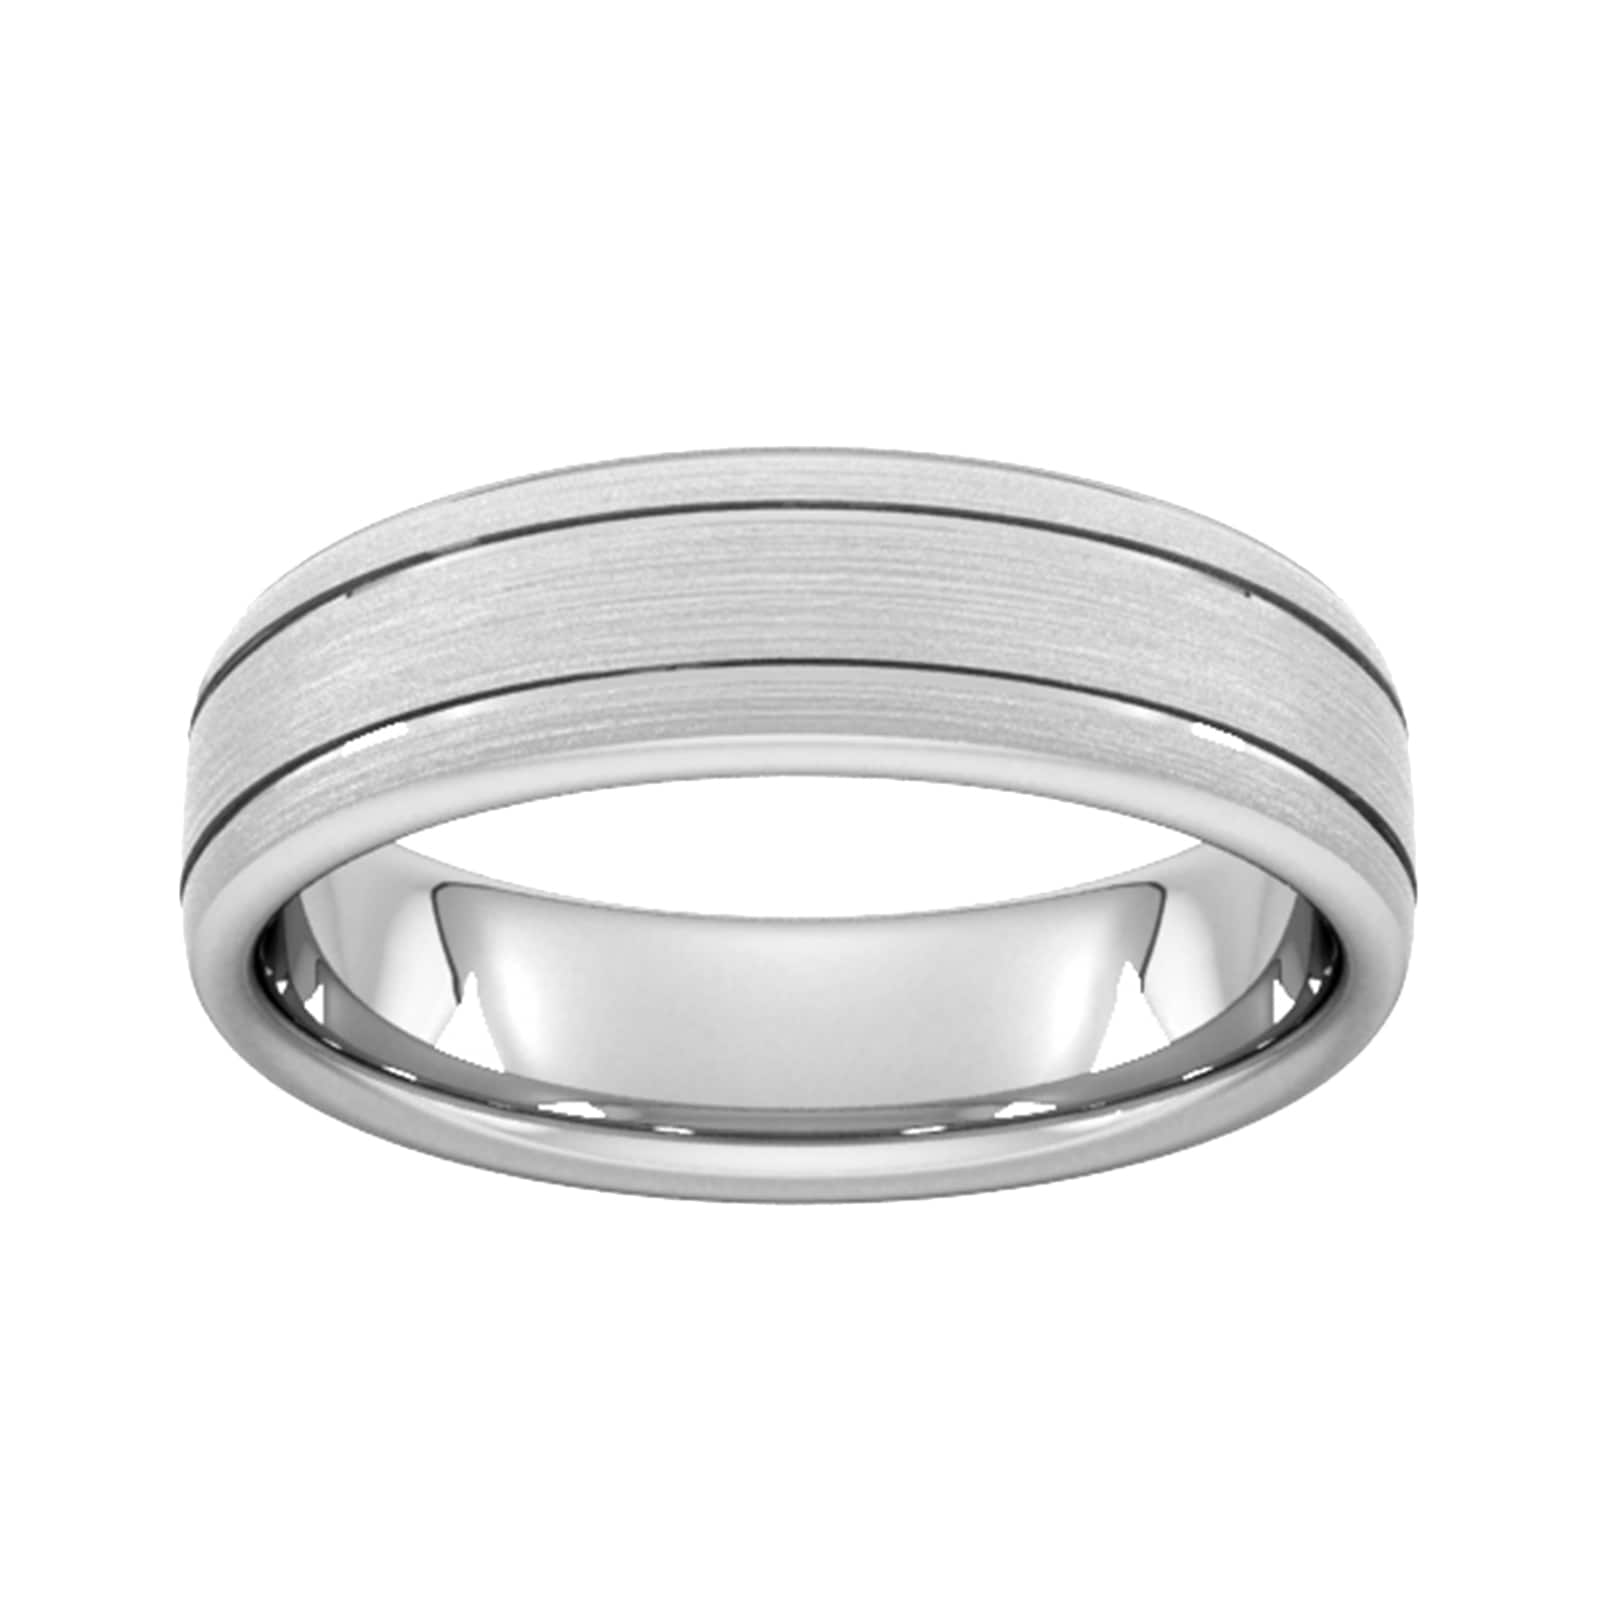 6mm Traditional Court Heavy Matt Finish With Double Grooves Wedding Ring In 950 Palladium - Ring Size T